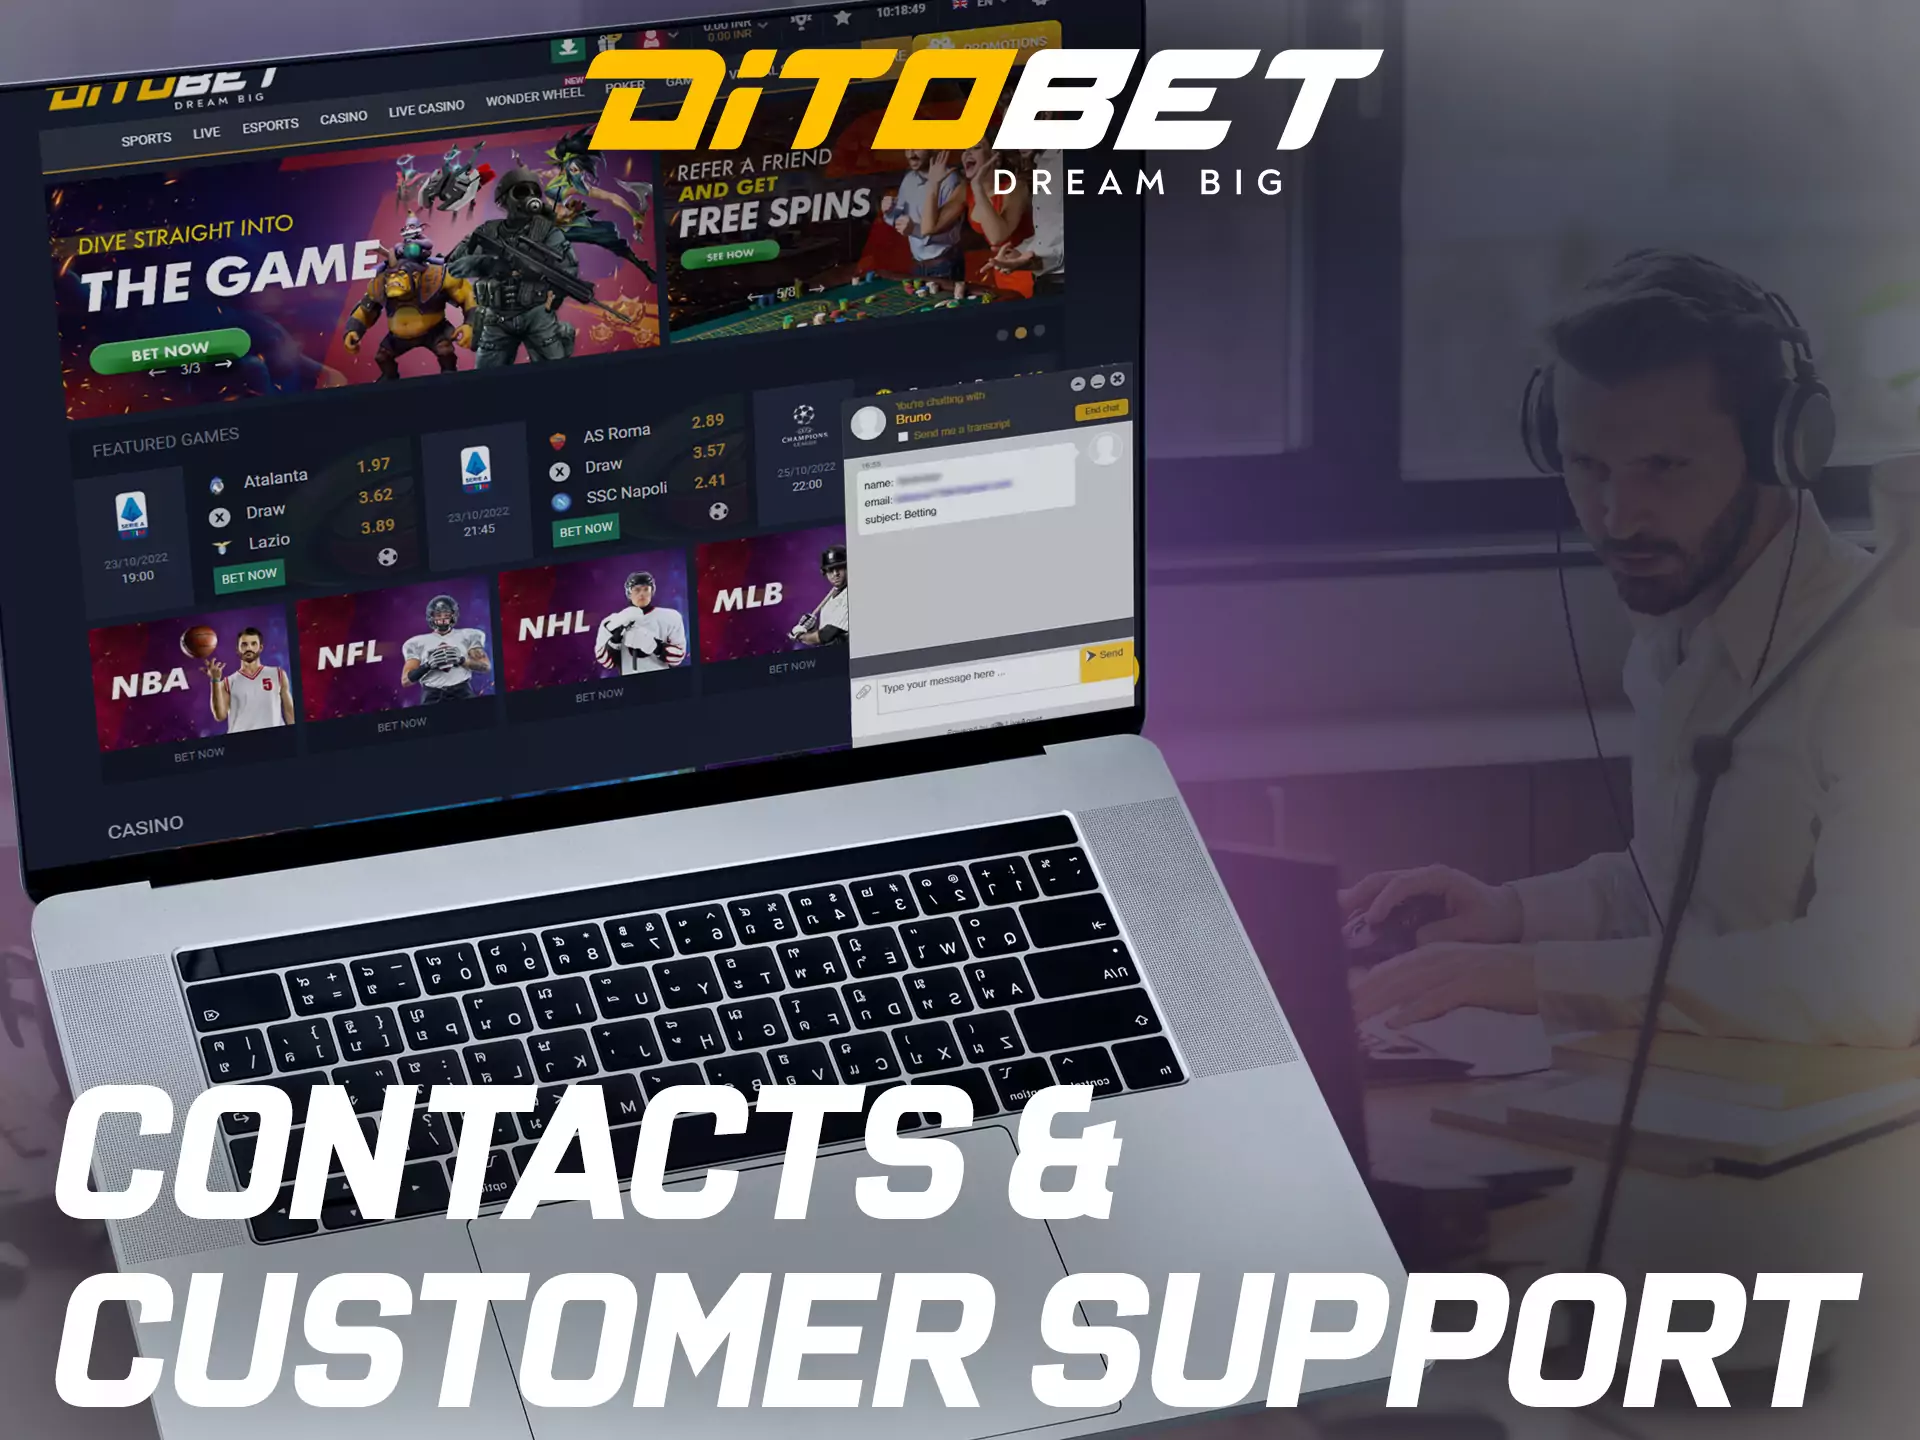 Ditobet support is ready to help with any of your questions